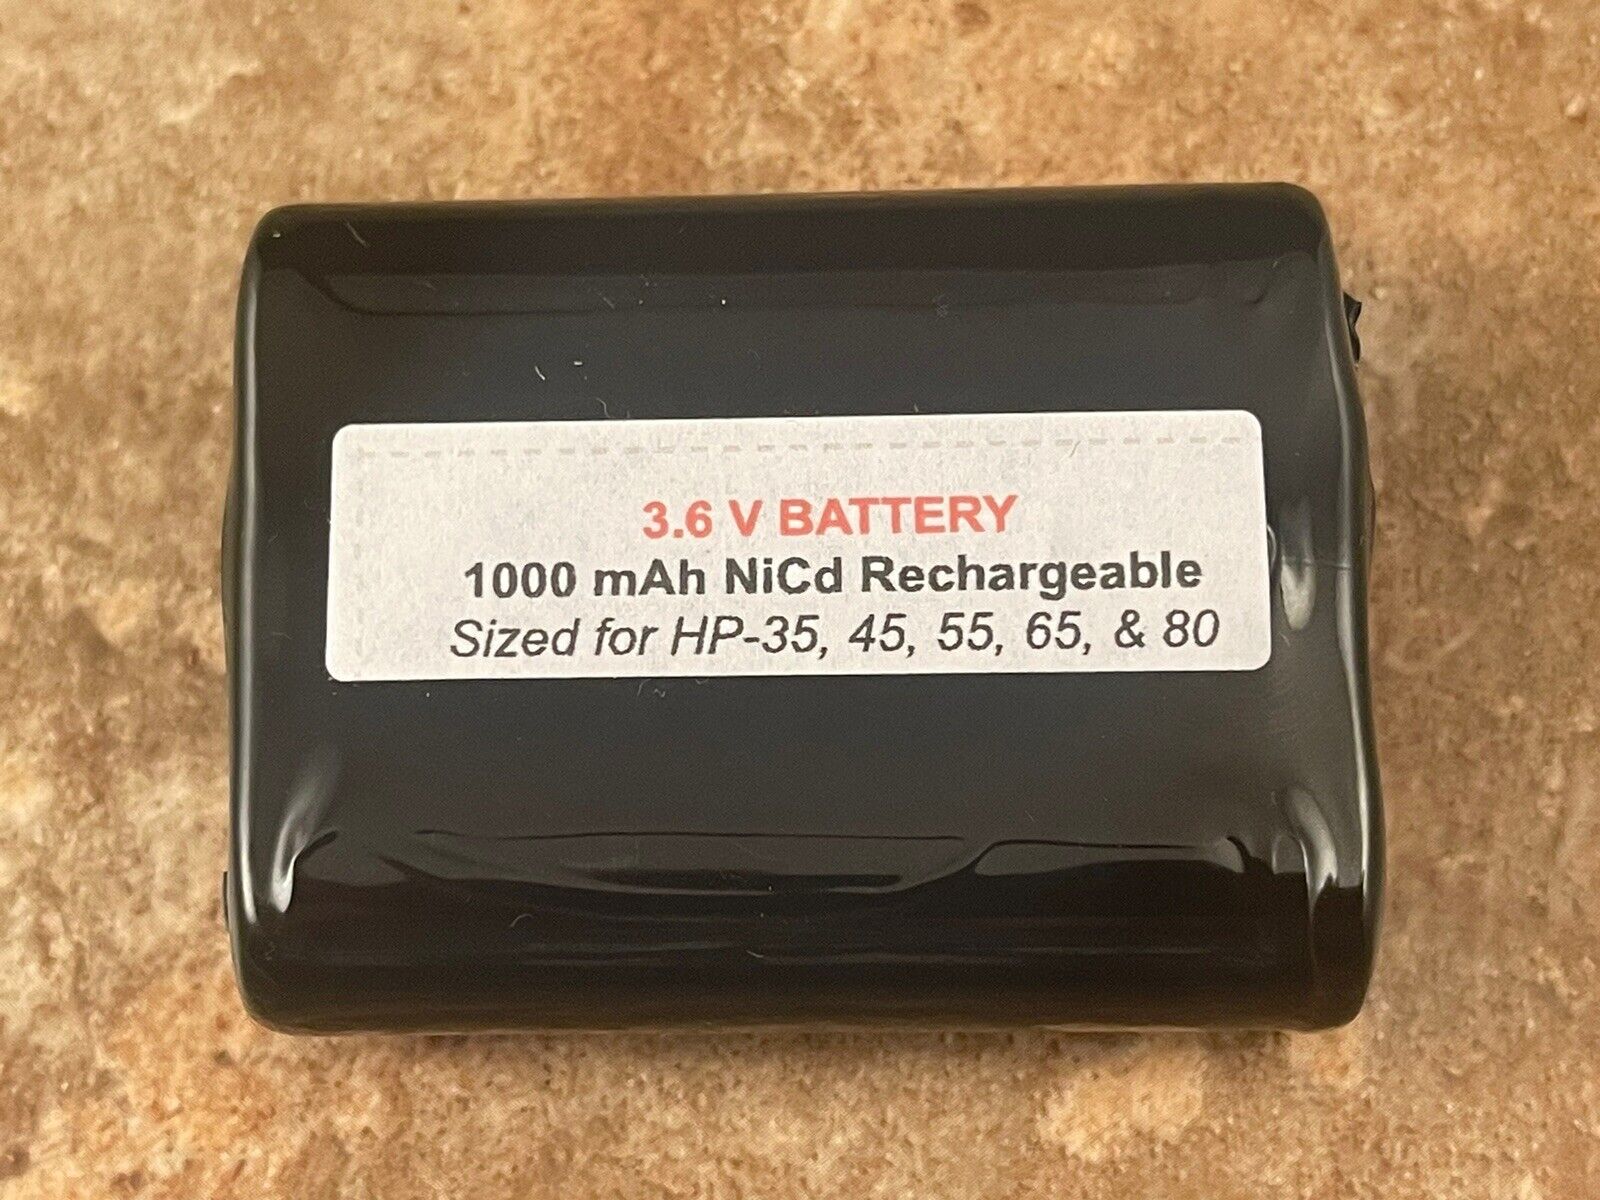 1000 mAh NiCd Battery Pack, For Vintage HP Calculator: HP-35, 45, 55, 65, 67, 80